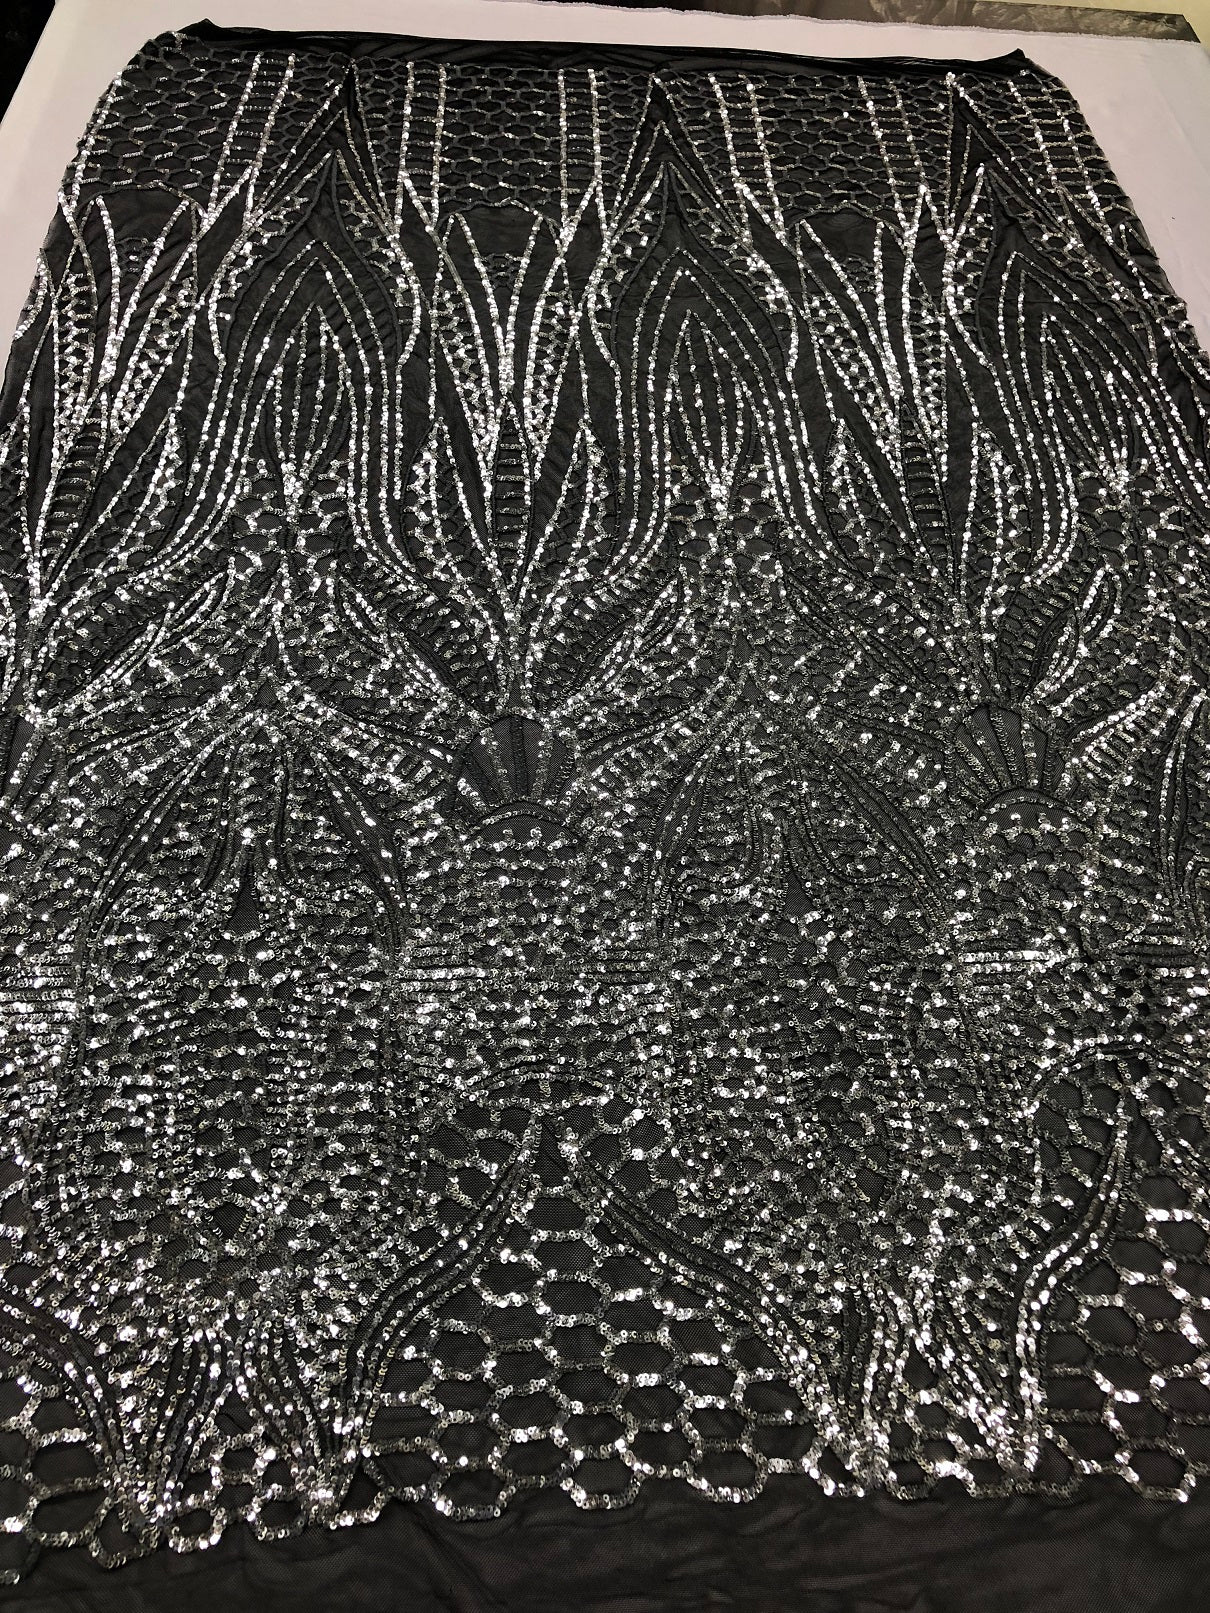 Geometric 4 Way Stretch Sequins Fabric - Silver on Black Mesh - Sequin